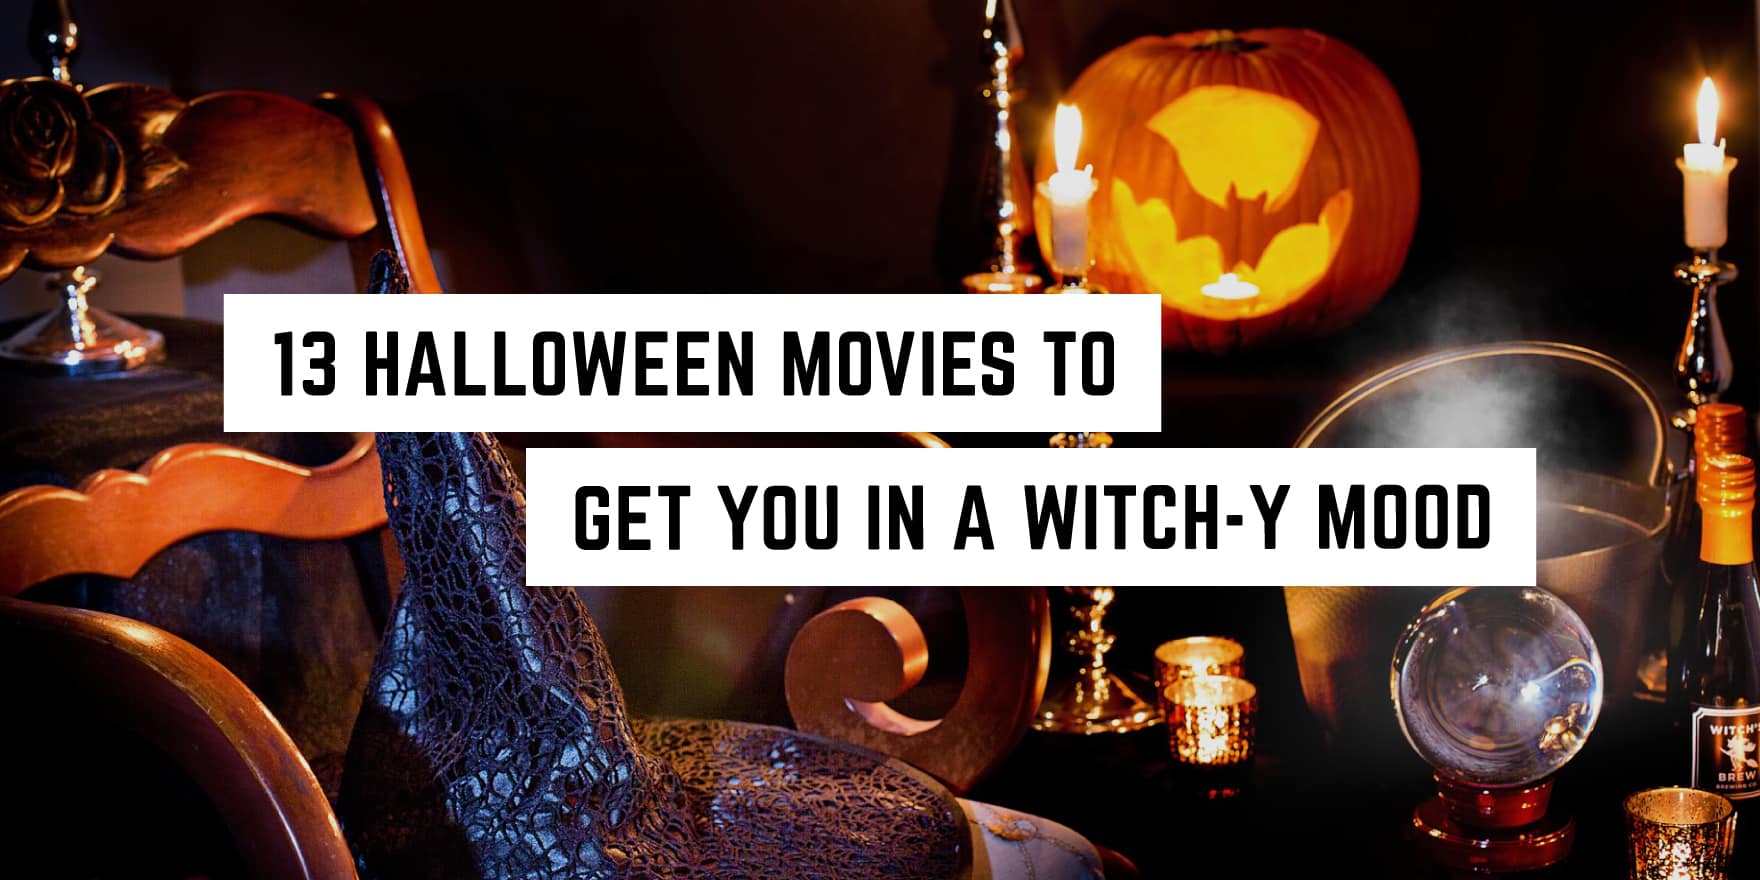 A spooky setup with a carved pumpkin, flickering candles, and an occult crystal ball, inviting you to a bewitching movie marathon with 13 Halloween favorites.